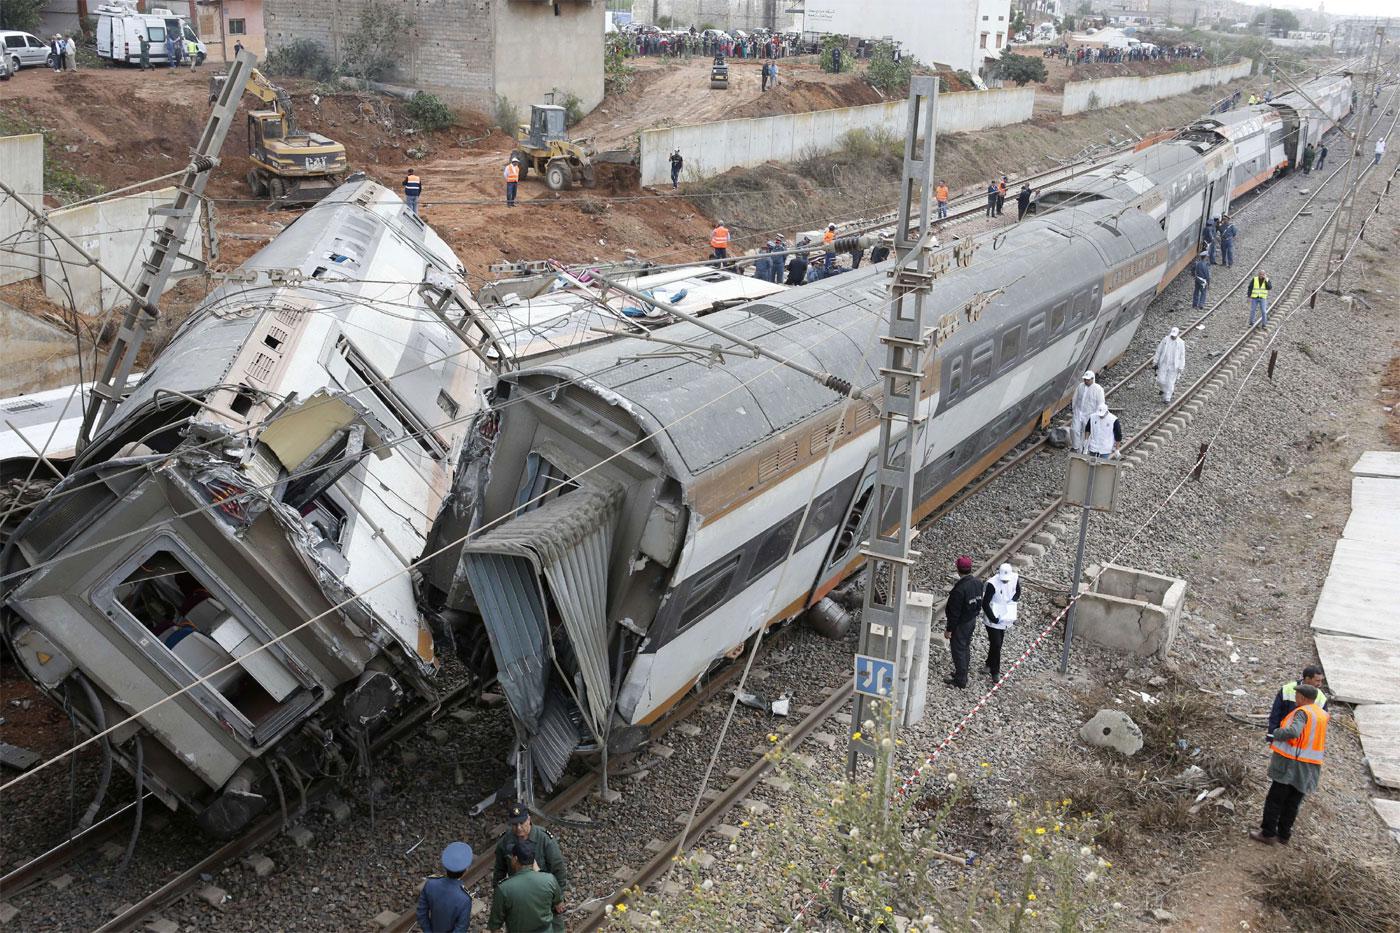 The crash occurred on a busy coastal line about 15 km north of Rabat